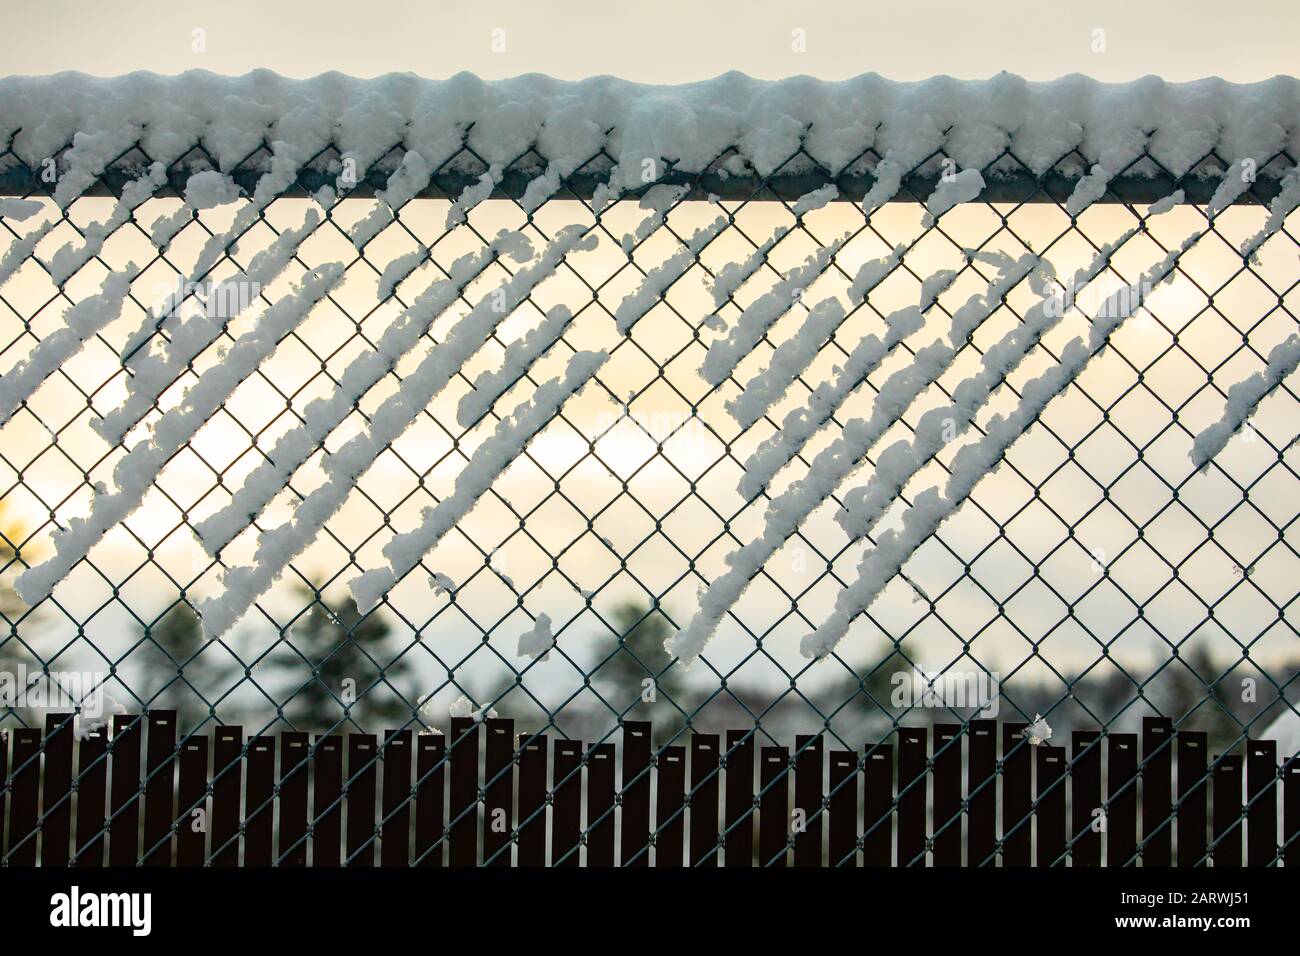 A selective focus view of a chain link diamond mesh fence creating a barrier during winter, covered in white snow and ice against a muted sky Stock Photo